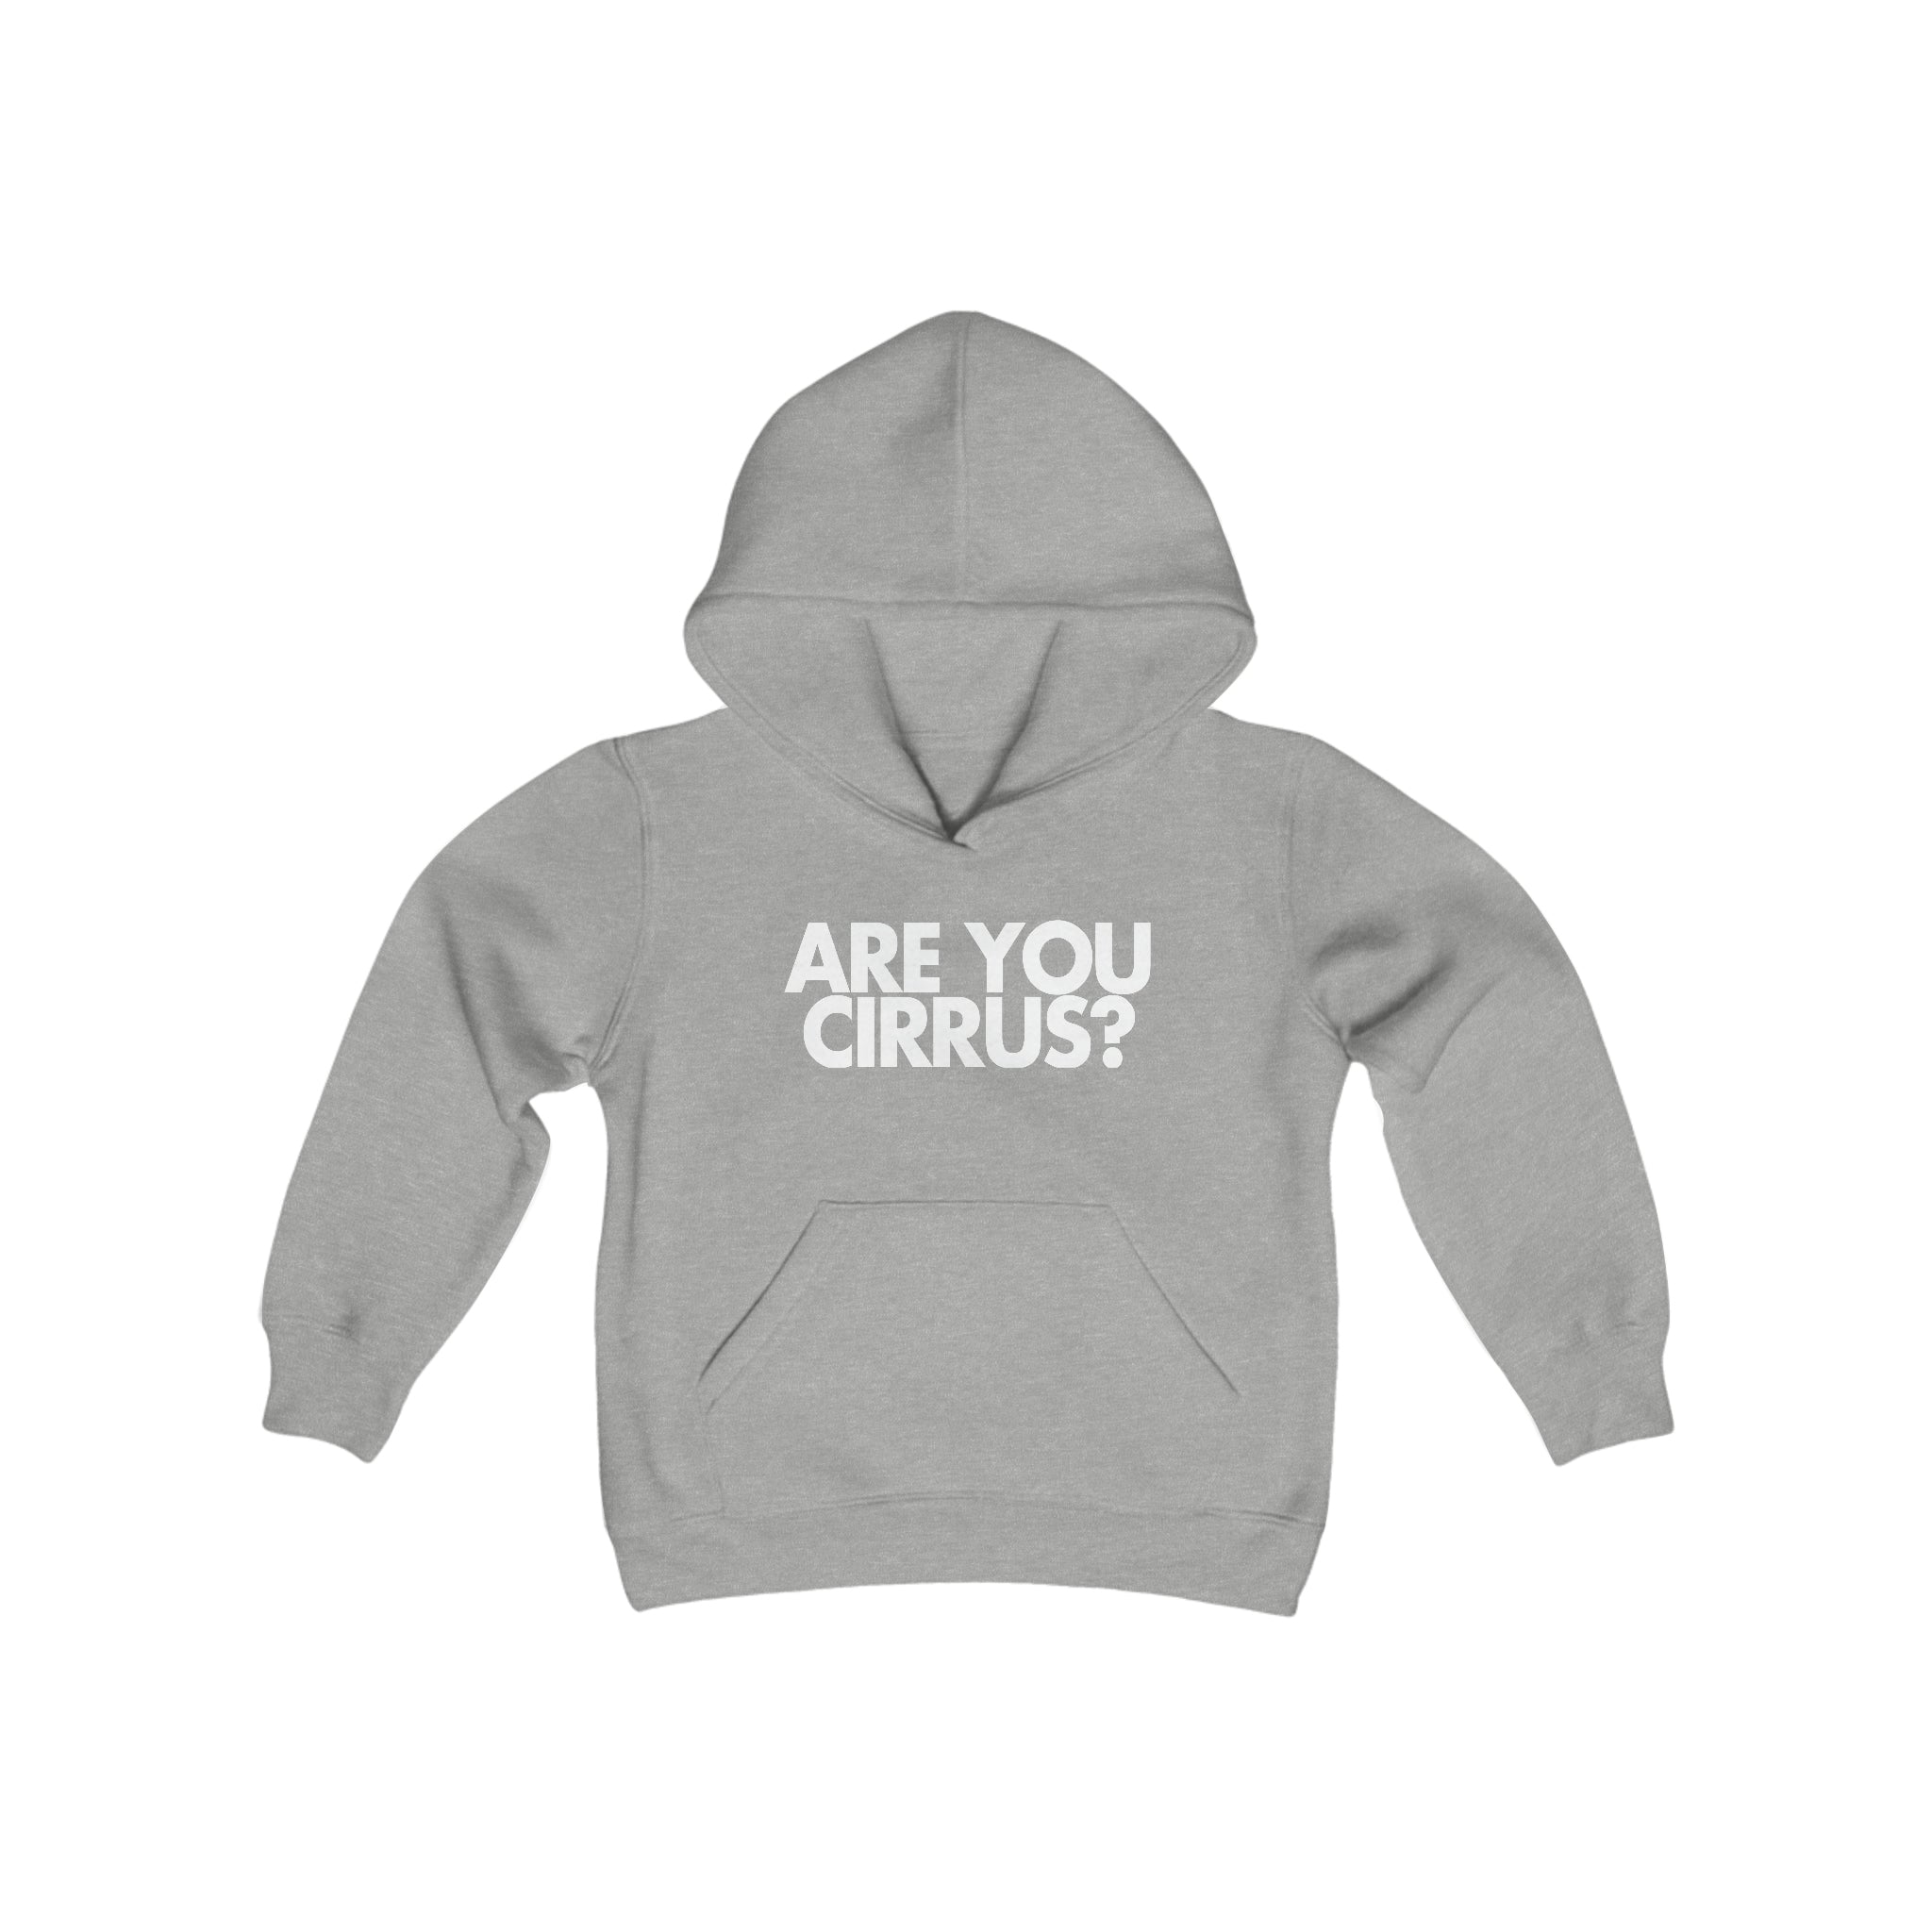 Are You Cirrus? Children's Hoodie 